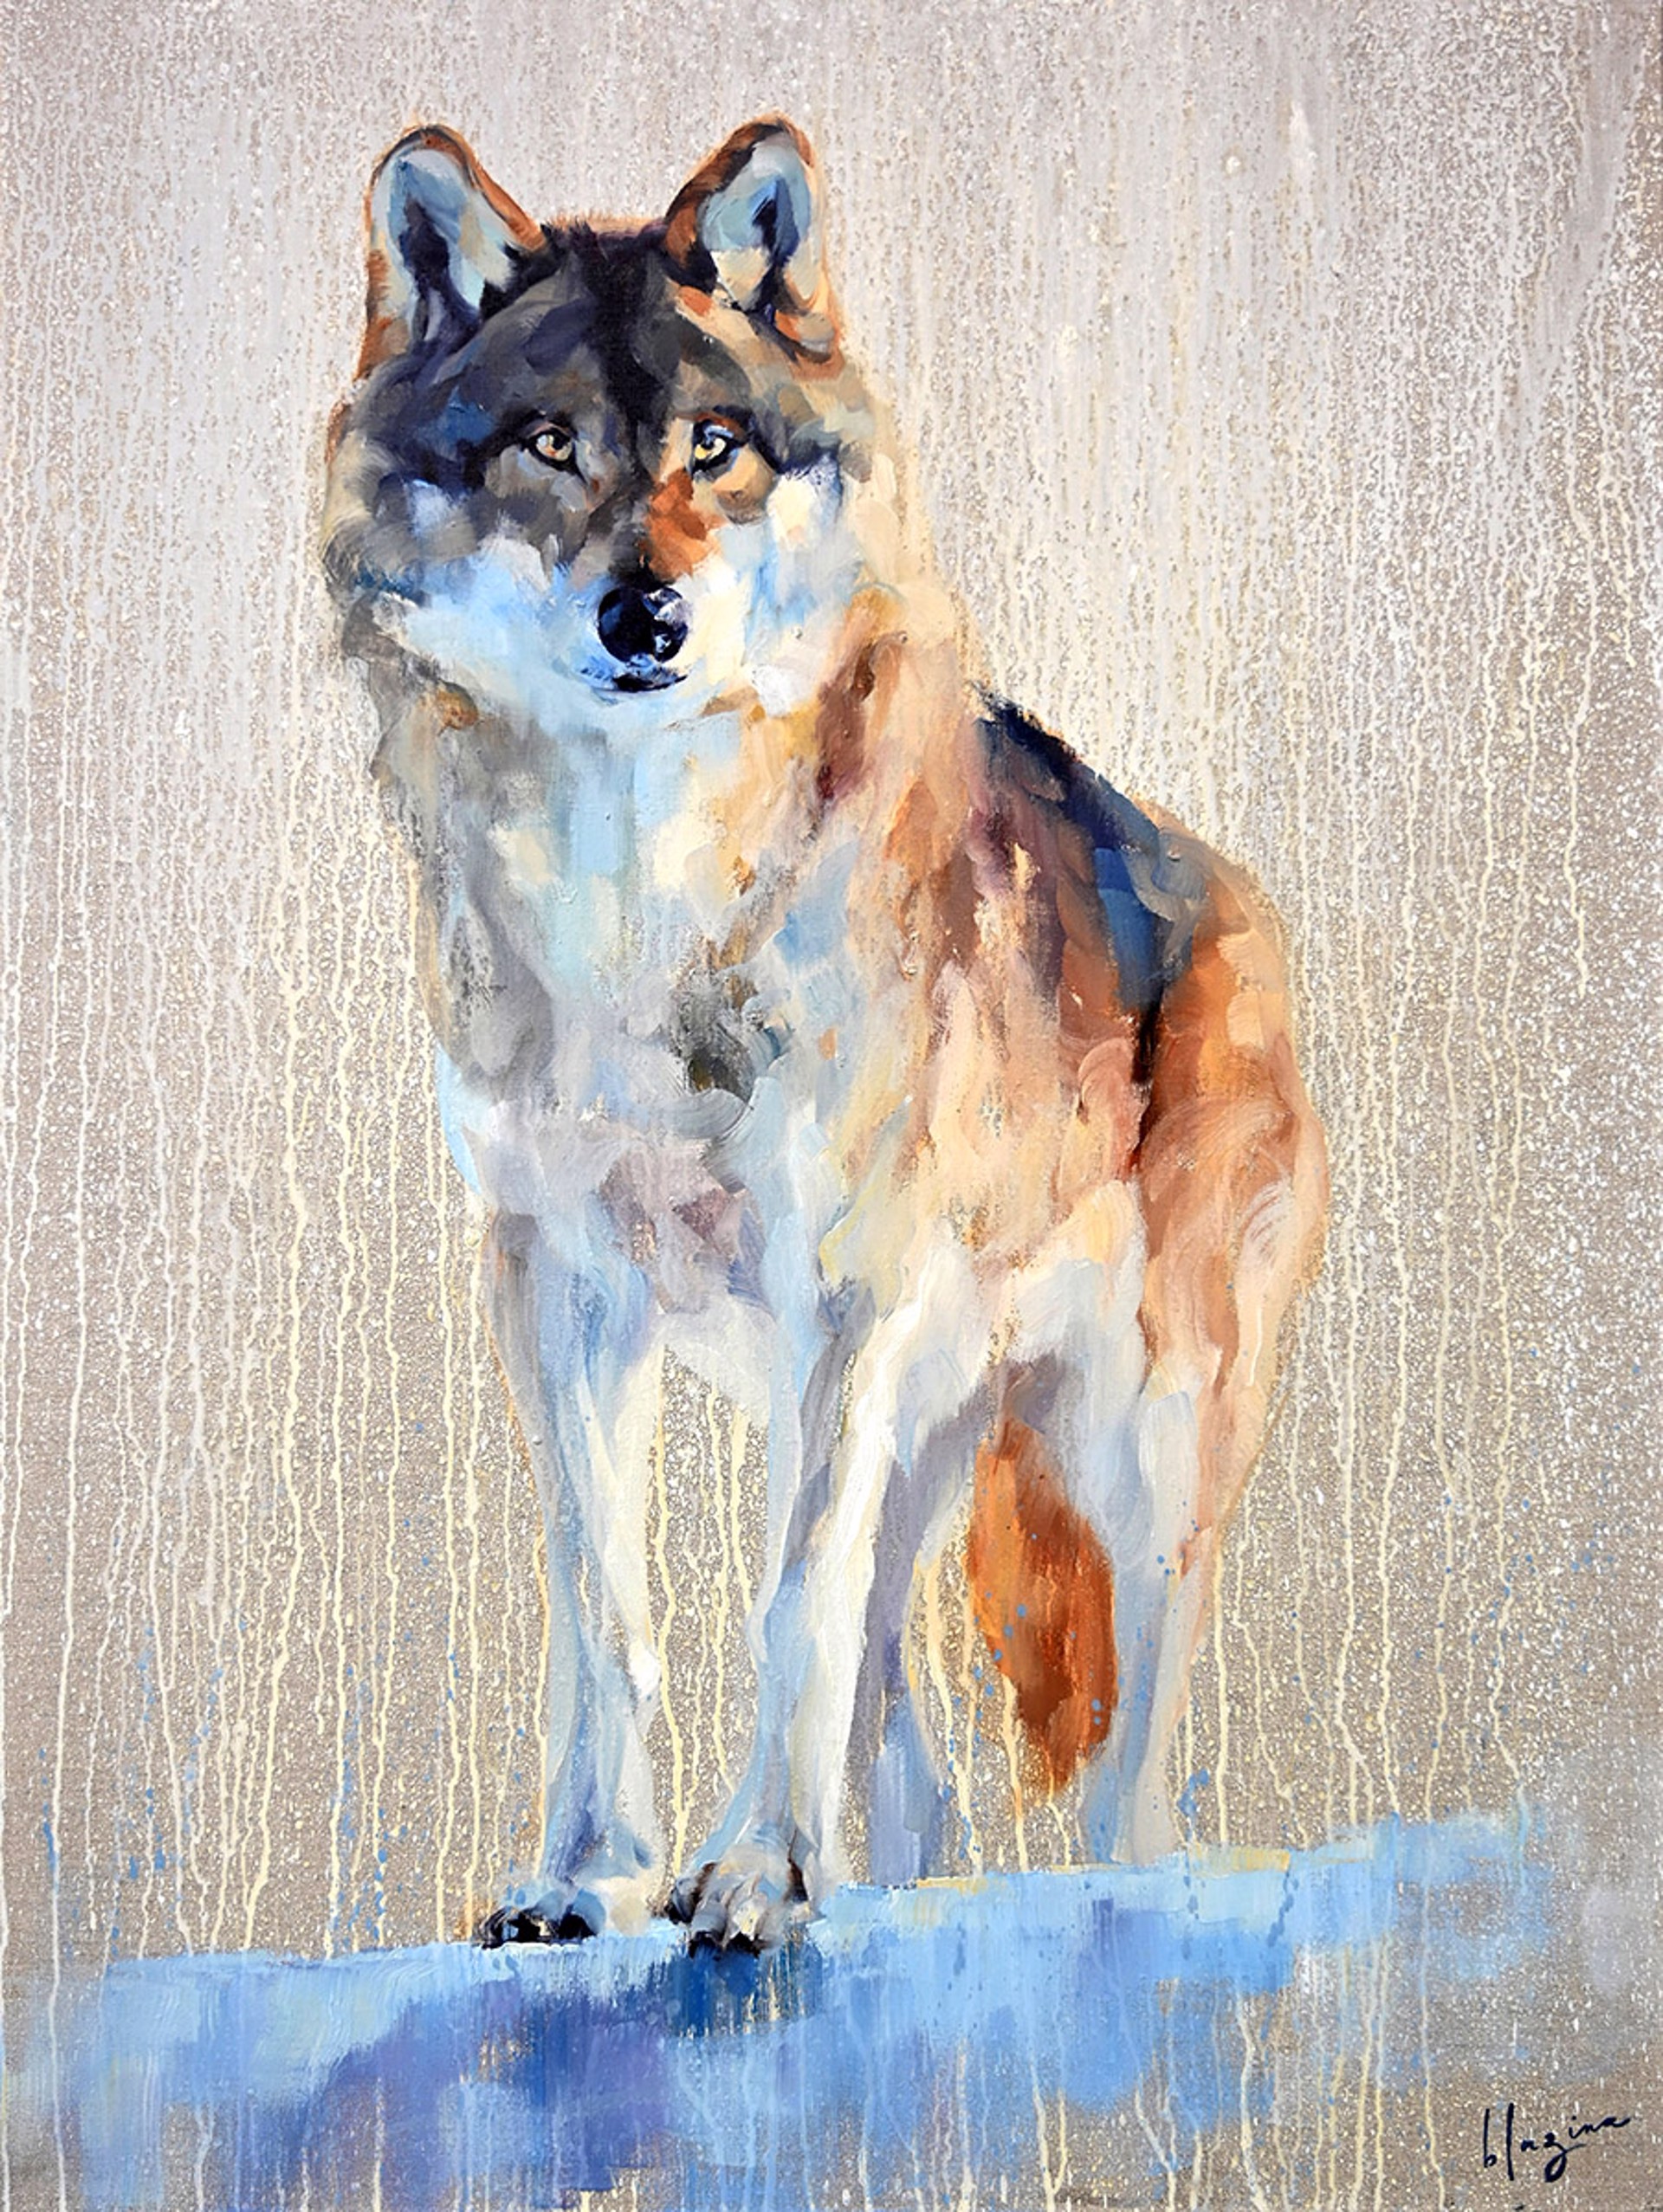 Original Oil Painting By Amber Blazina Featuring A Wolf On Exposed Linen